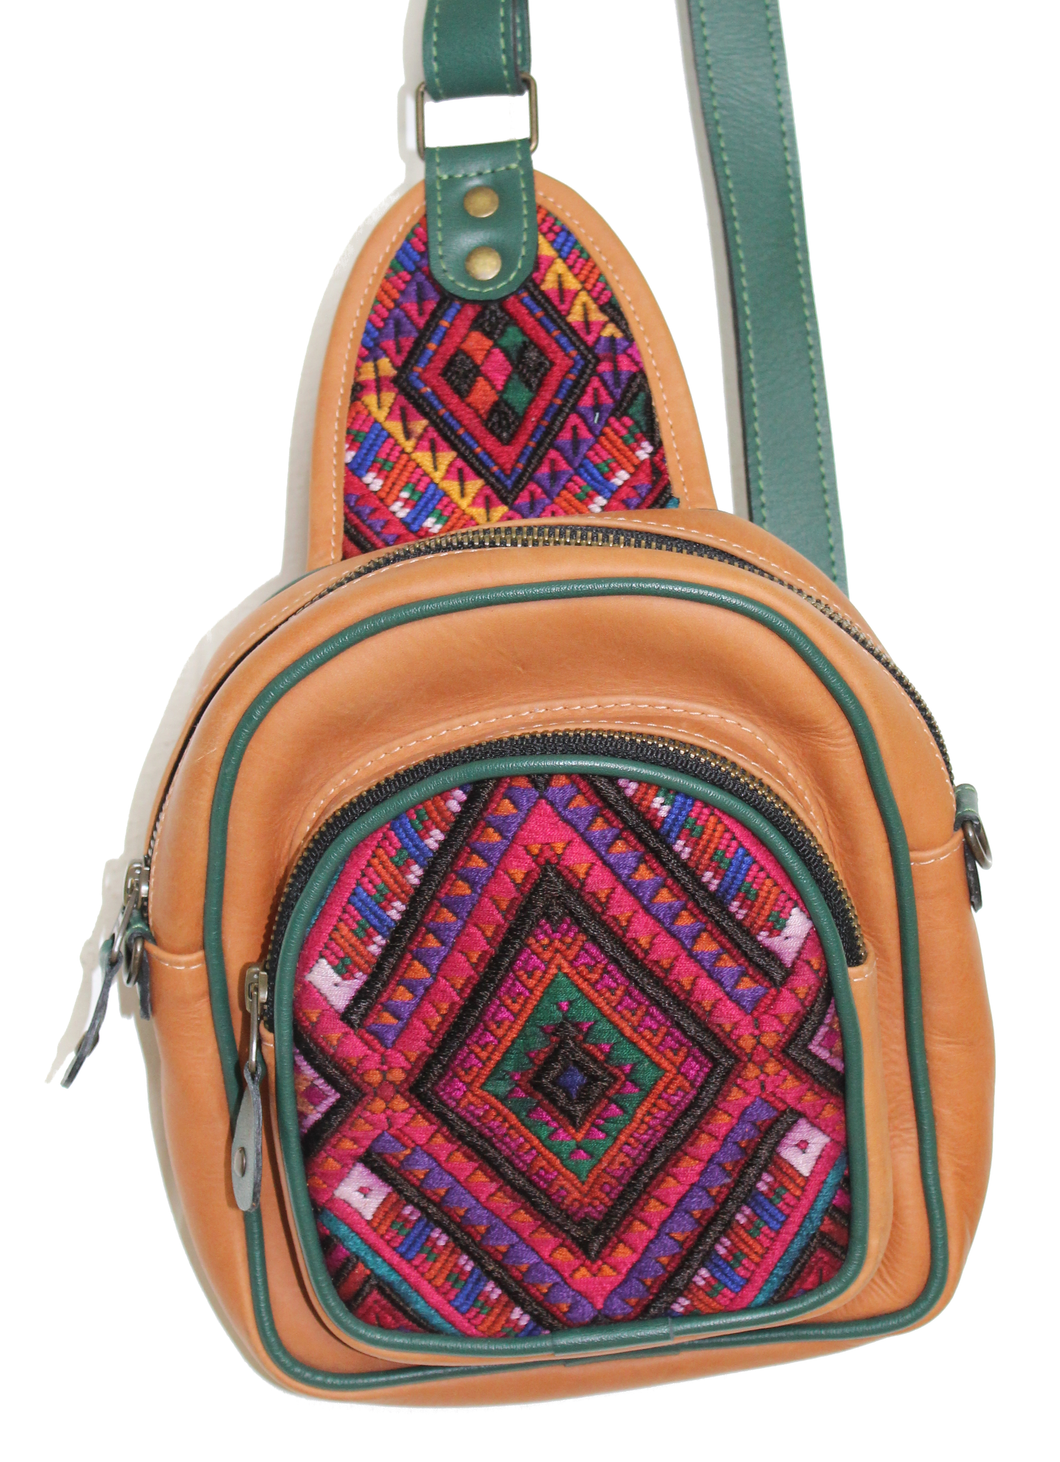 MoonLake Designs Blake Sling Over Backpack Bag in pear tan handcrafted leather with eye catching geometric huipil in shades of pinks and blues featuring dark green leather adjustable strap and multiple easy access pockets perfect for concerts or traveling